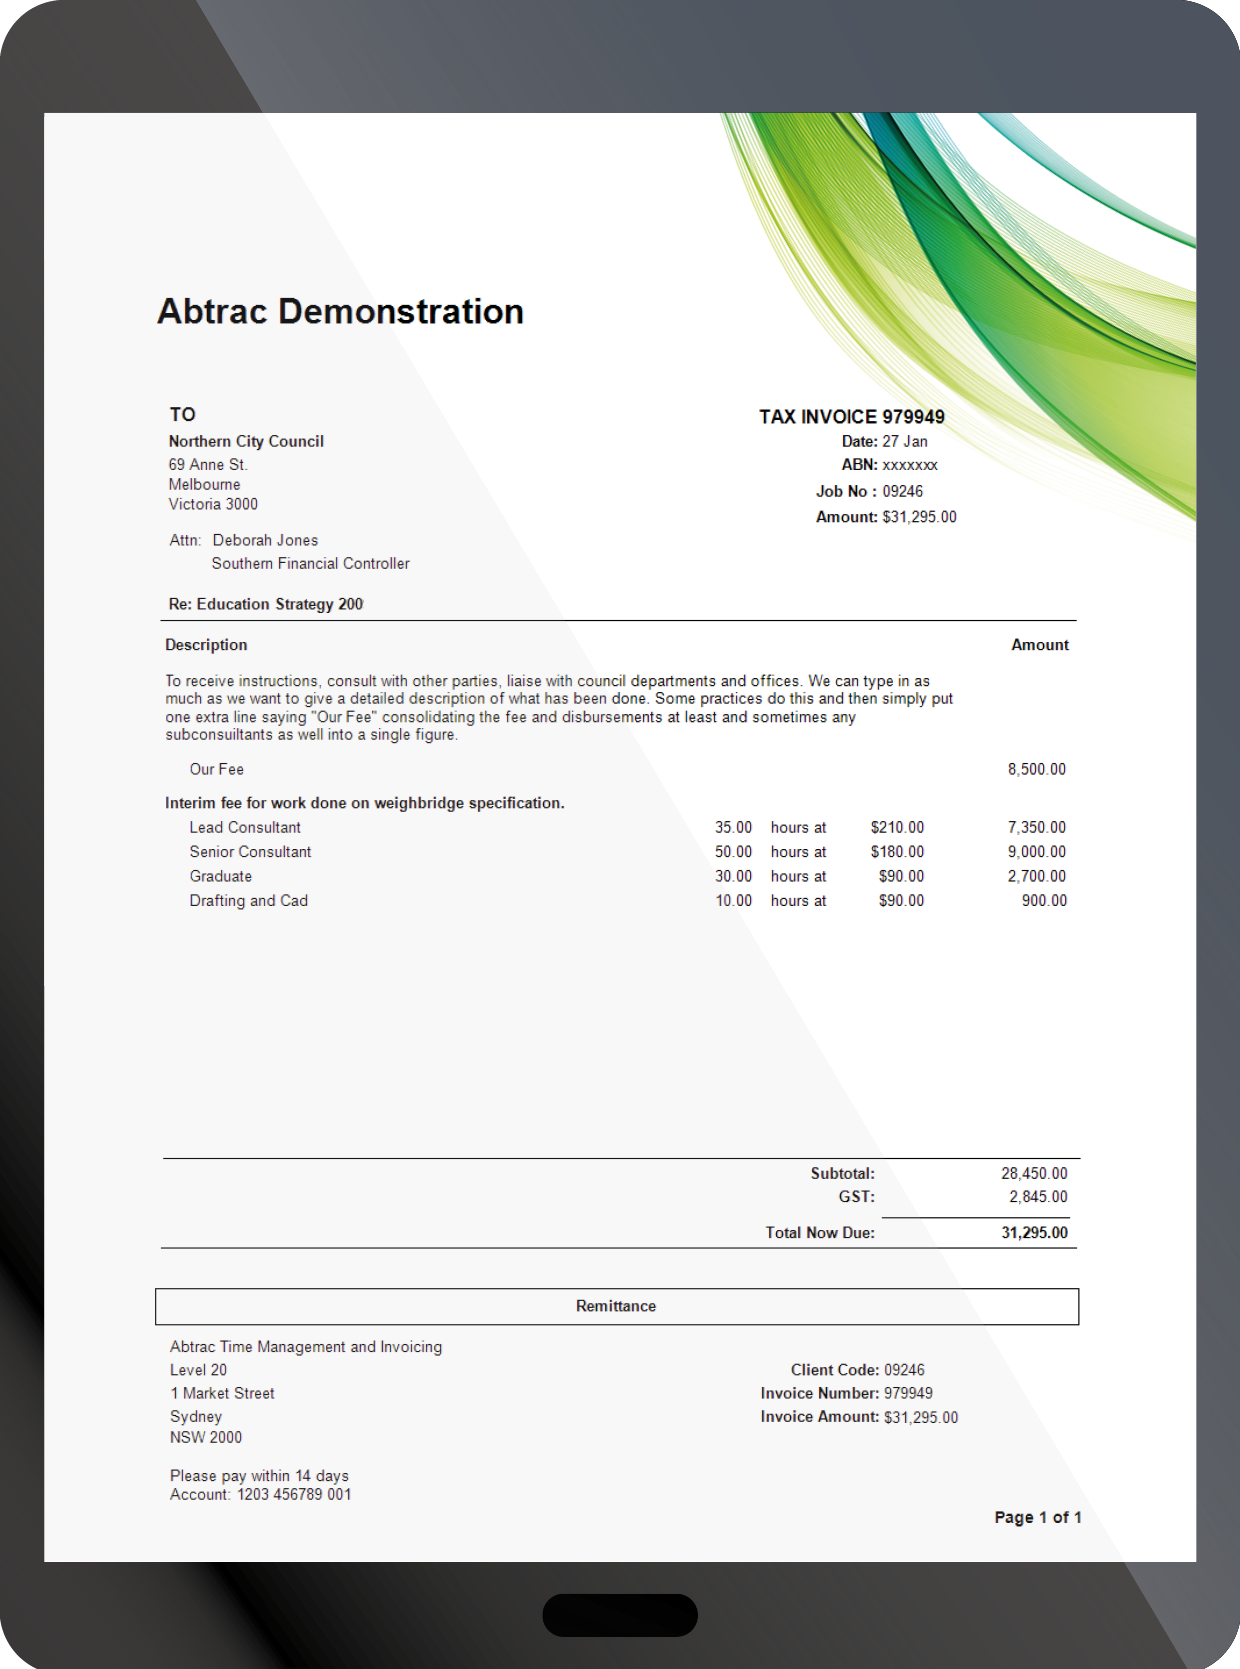 Invoice Example - Styling options available with hourly rates invoice with itemised disbursements